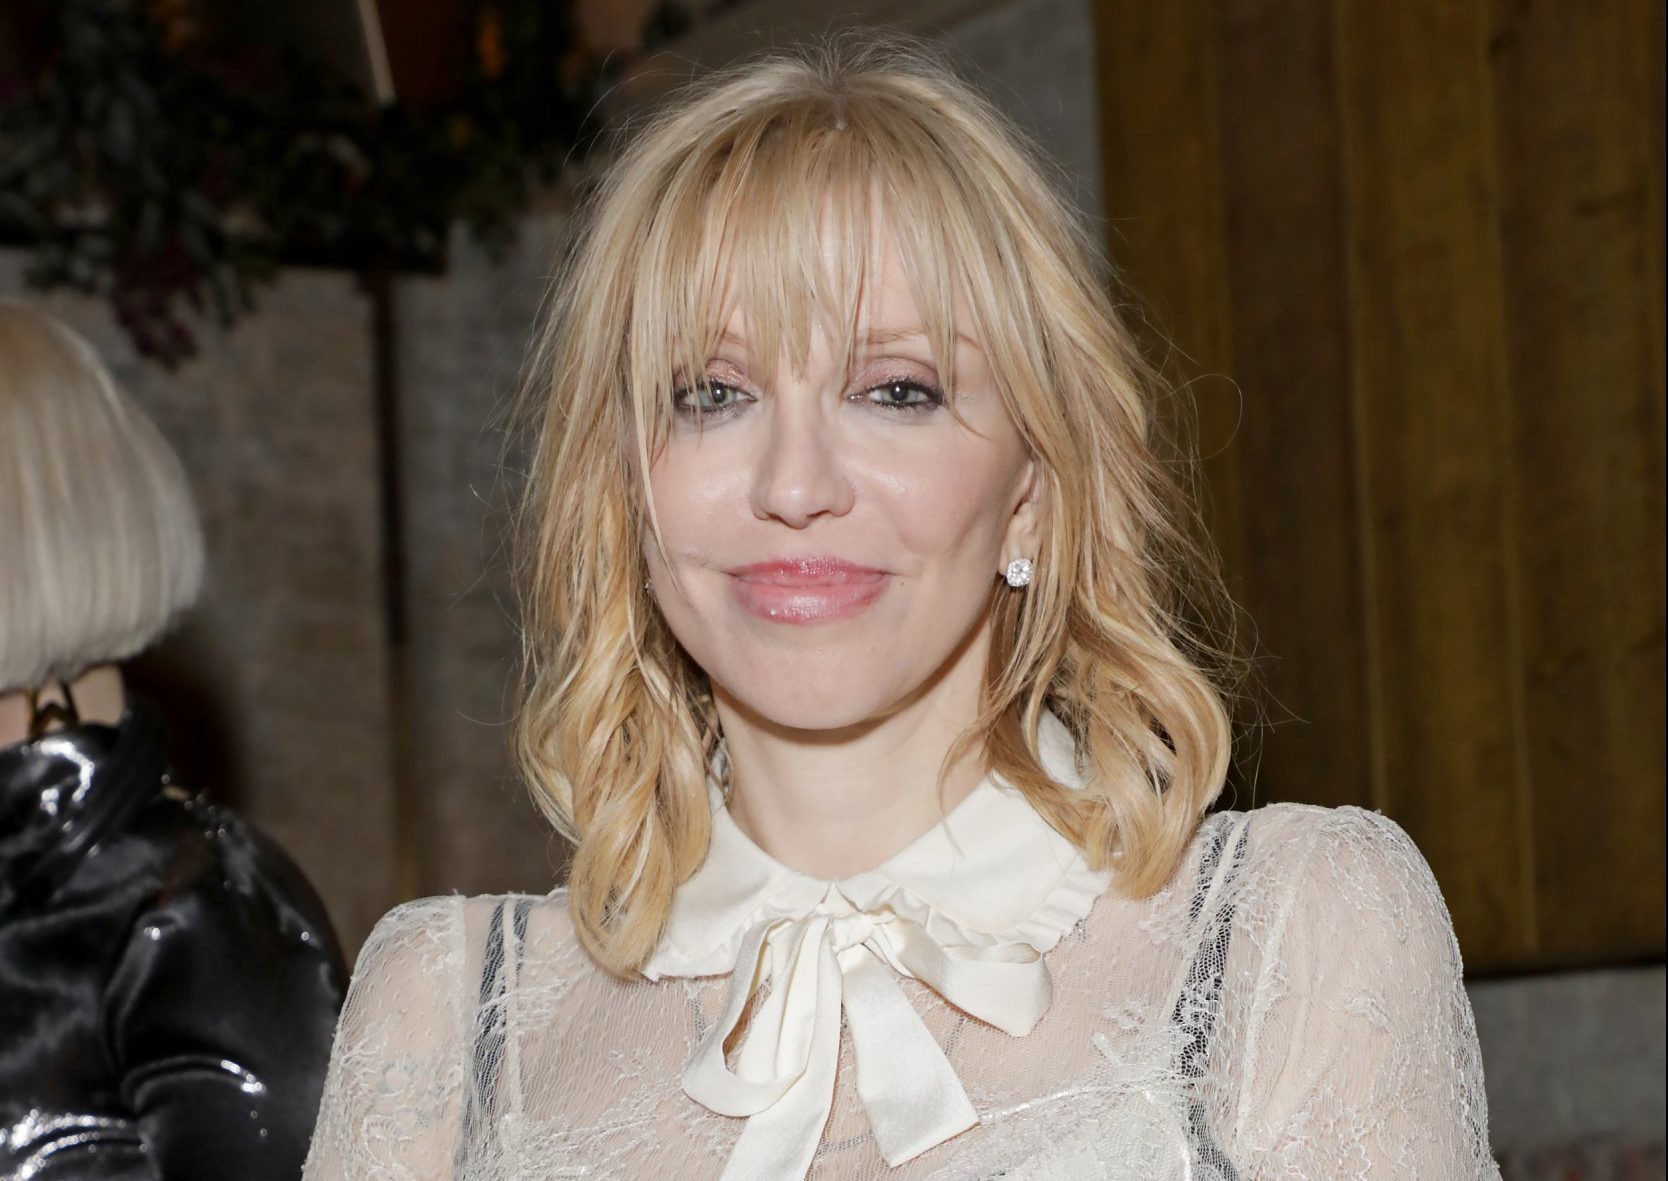 Courtney Love apologises after accusing Trent Reznor of child abuse and slamming Dave Grohl over Nirvana